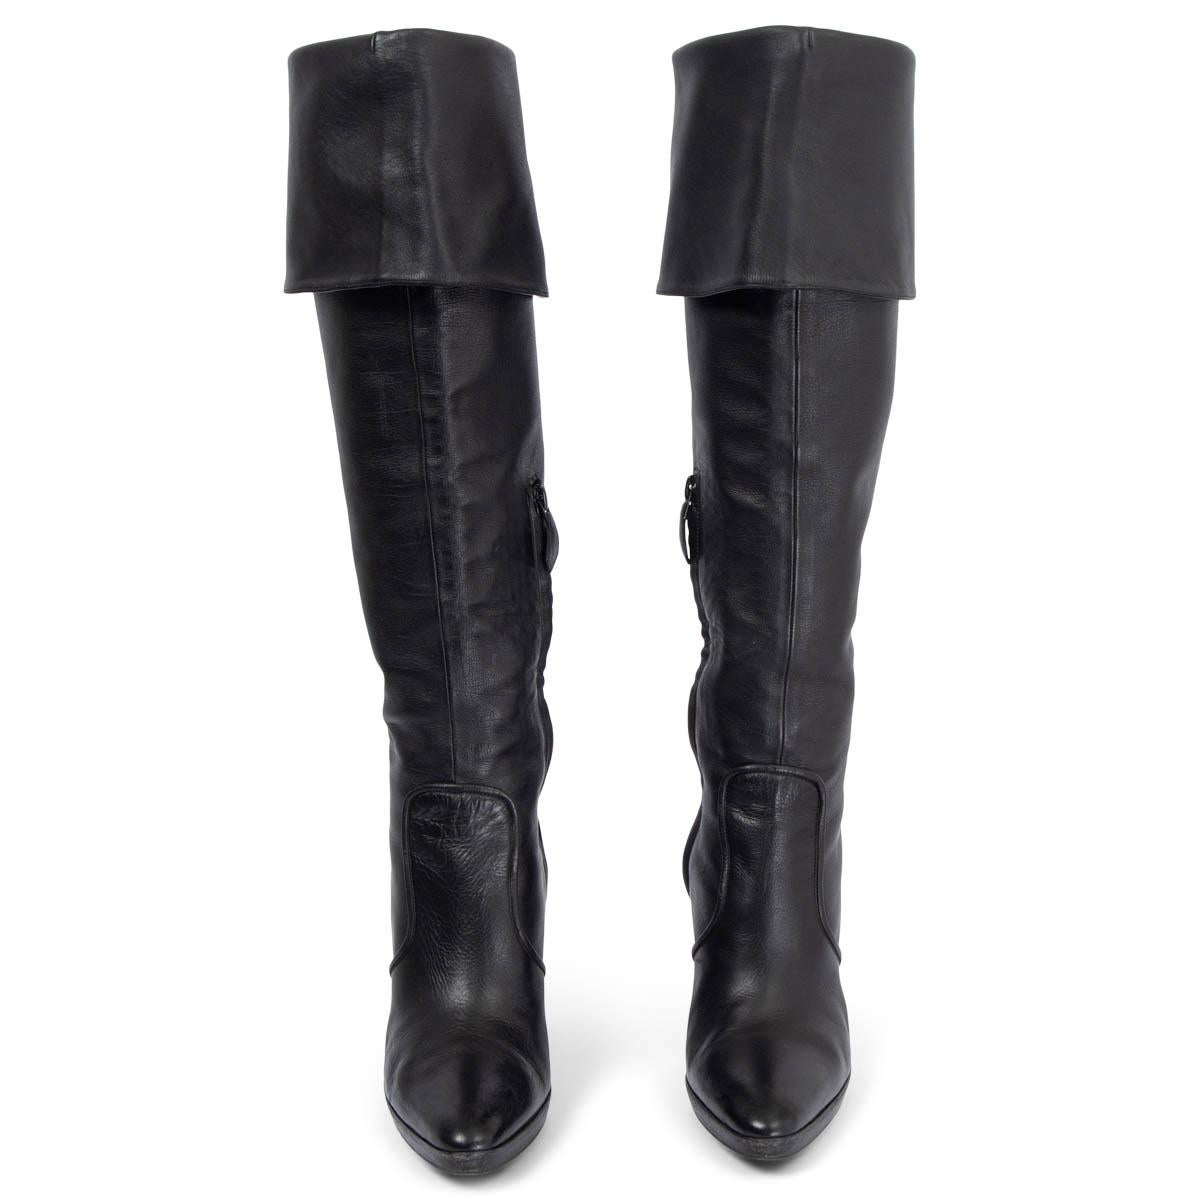 100% authentic Hermès knee-high crusader boots in smooth black calfskin featuring a stacked heel and a fold-over top. Open with an inner-zipper. Have been worn and are in excellent condition. Come with dust bags. 

Measurements
Imprinted